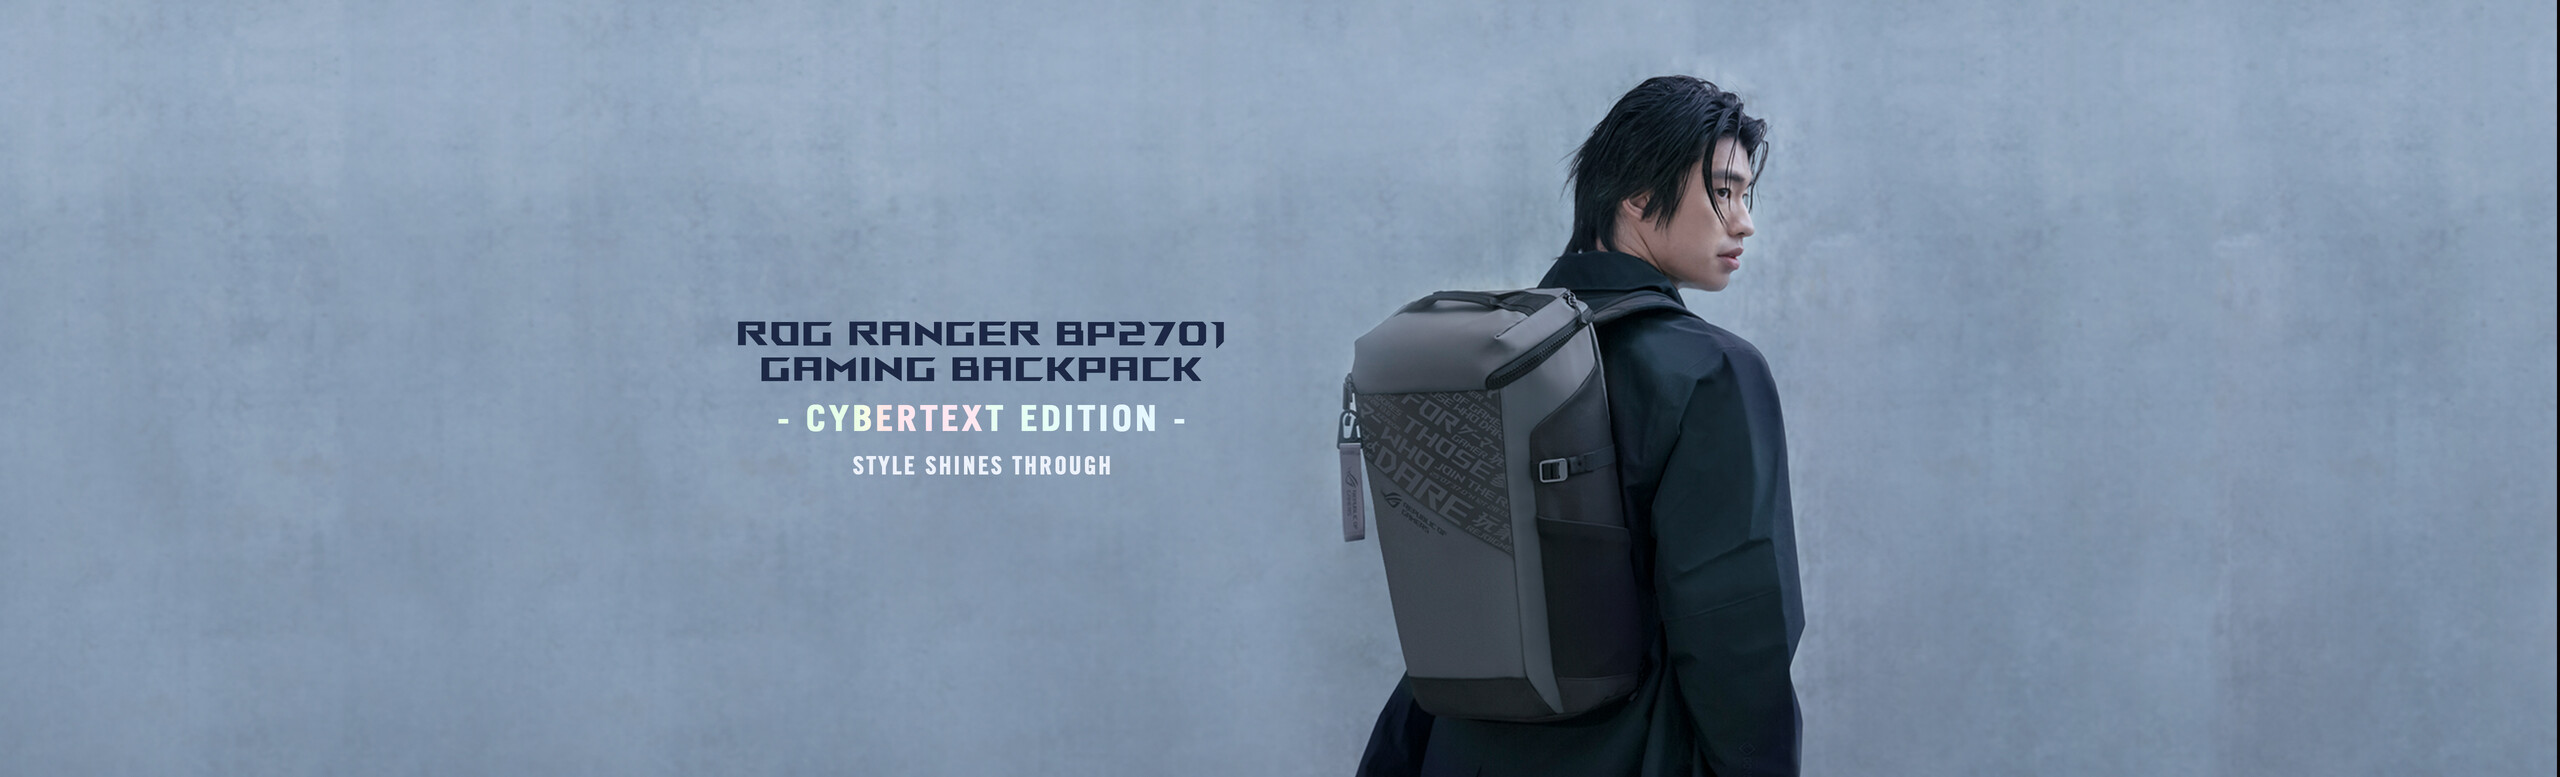 A person with a dark jacket standing near a concrete wall, looking over his shoulder and wearing an ROG Ranger BP2701 Gaming Backpack.